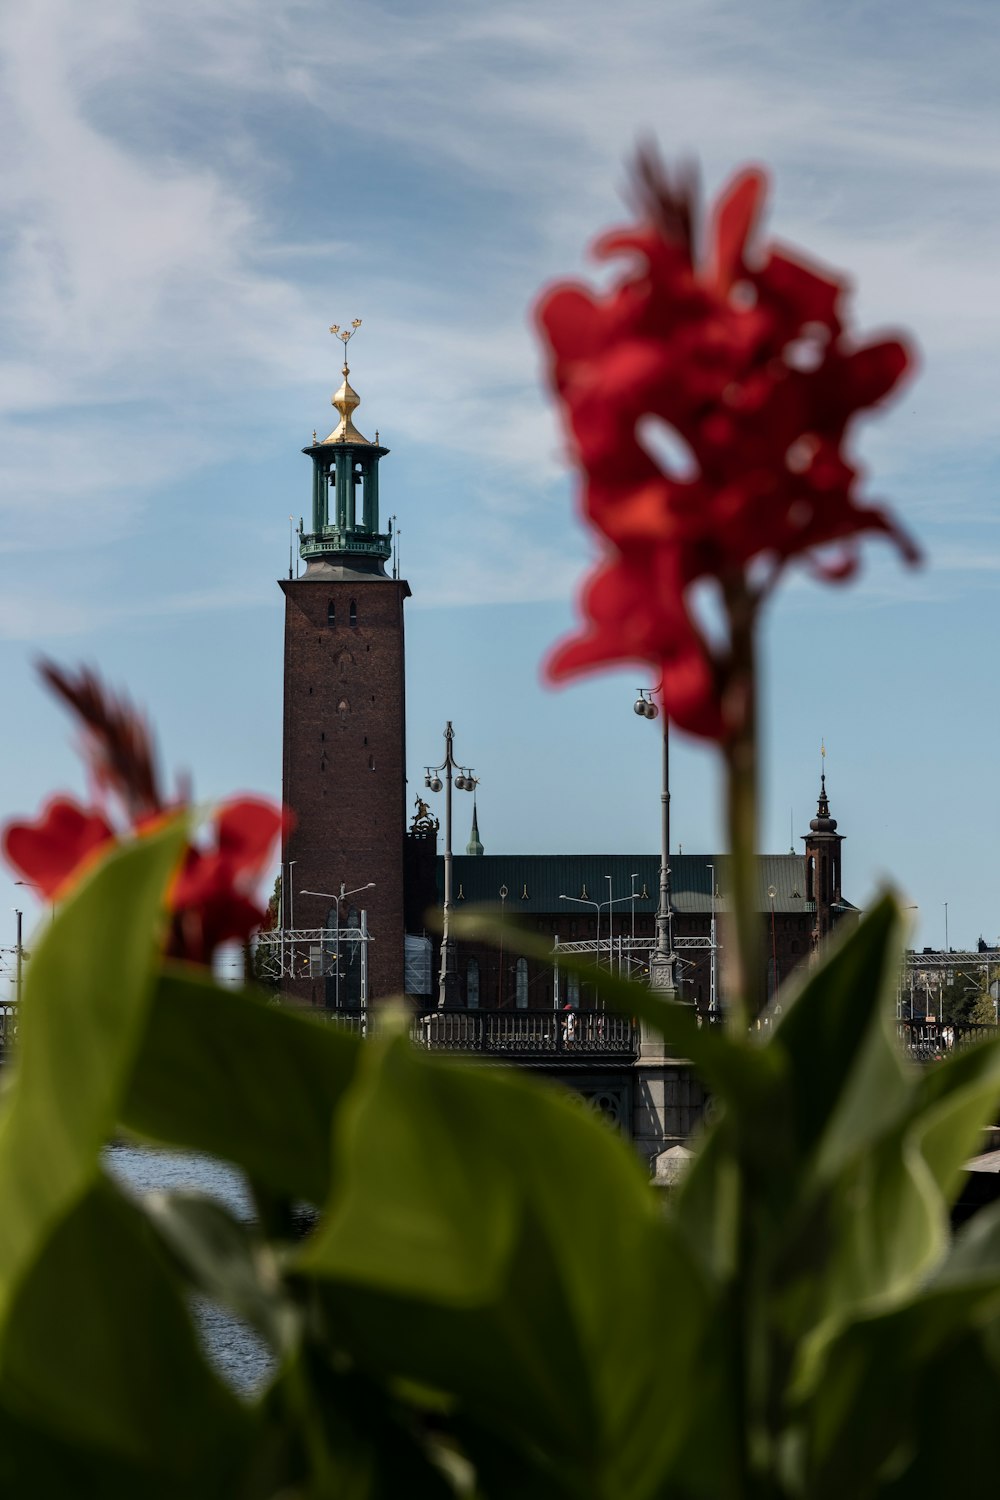 a red flower in front of a building with a clock tower in the background